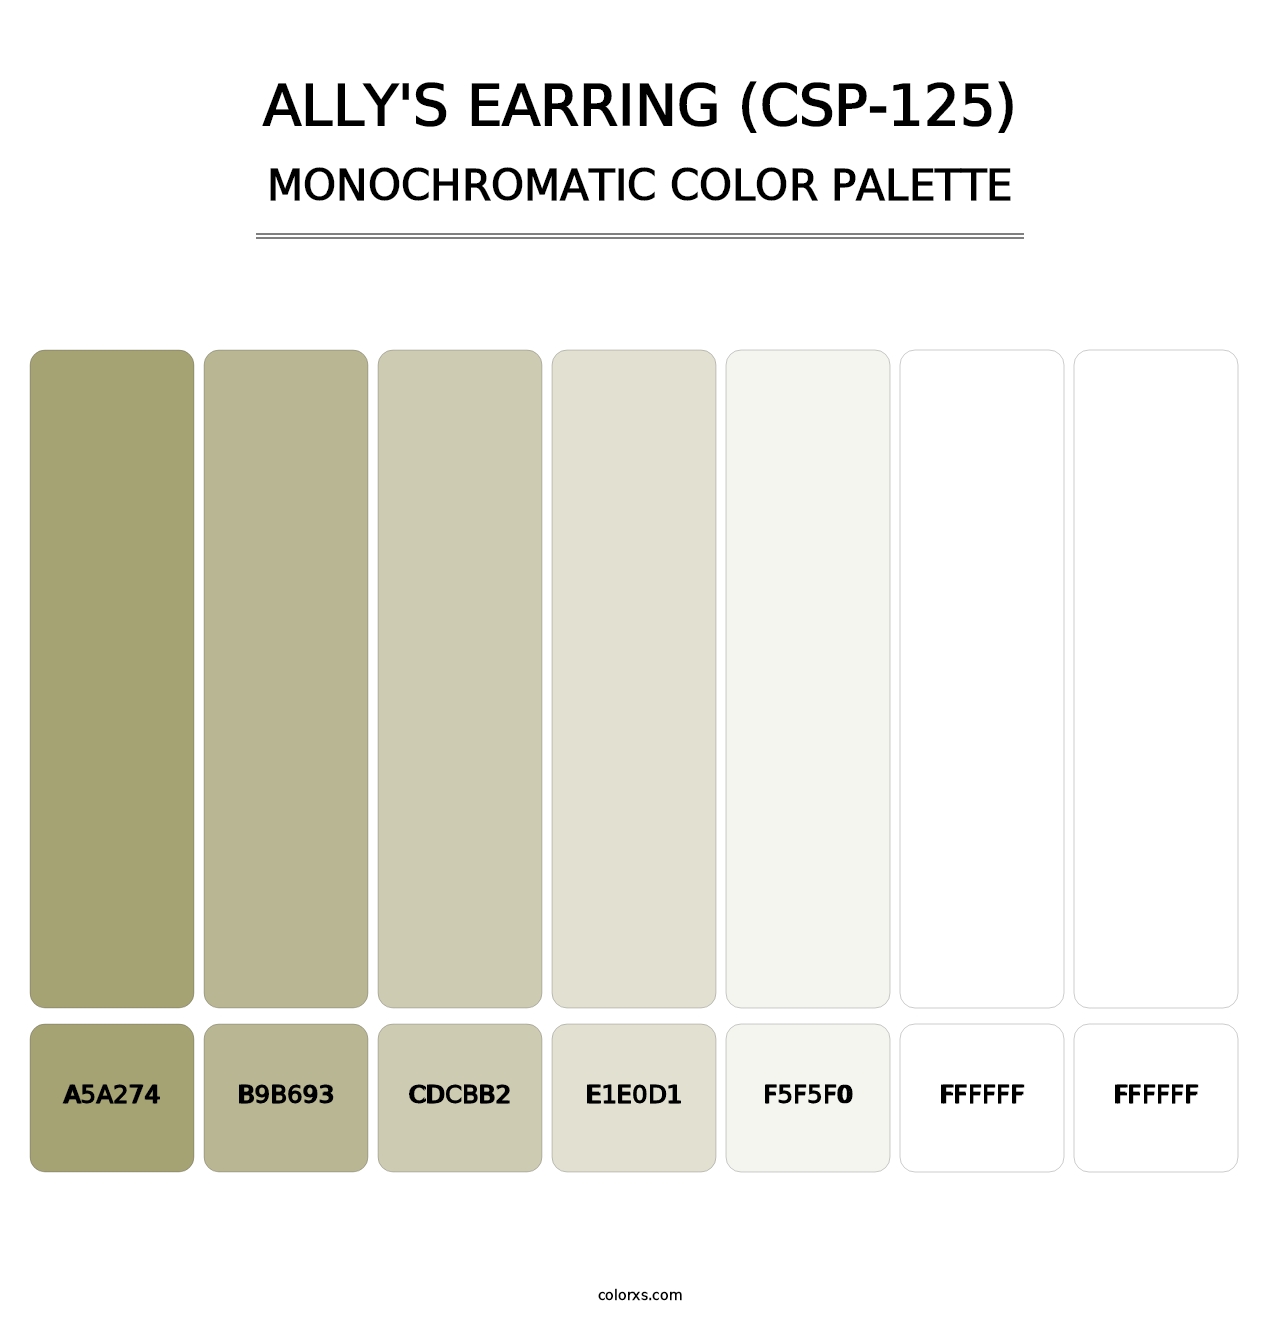 Ally's Earring (CSP-125) - Monochromatic Color Palette